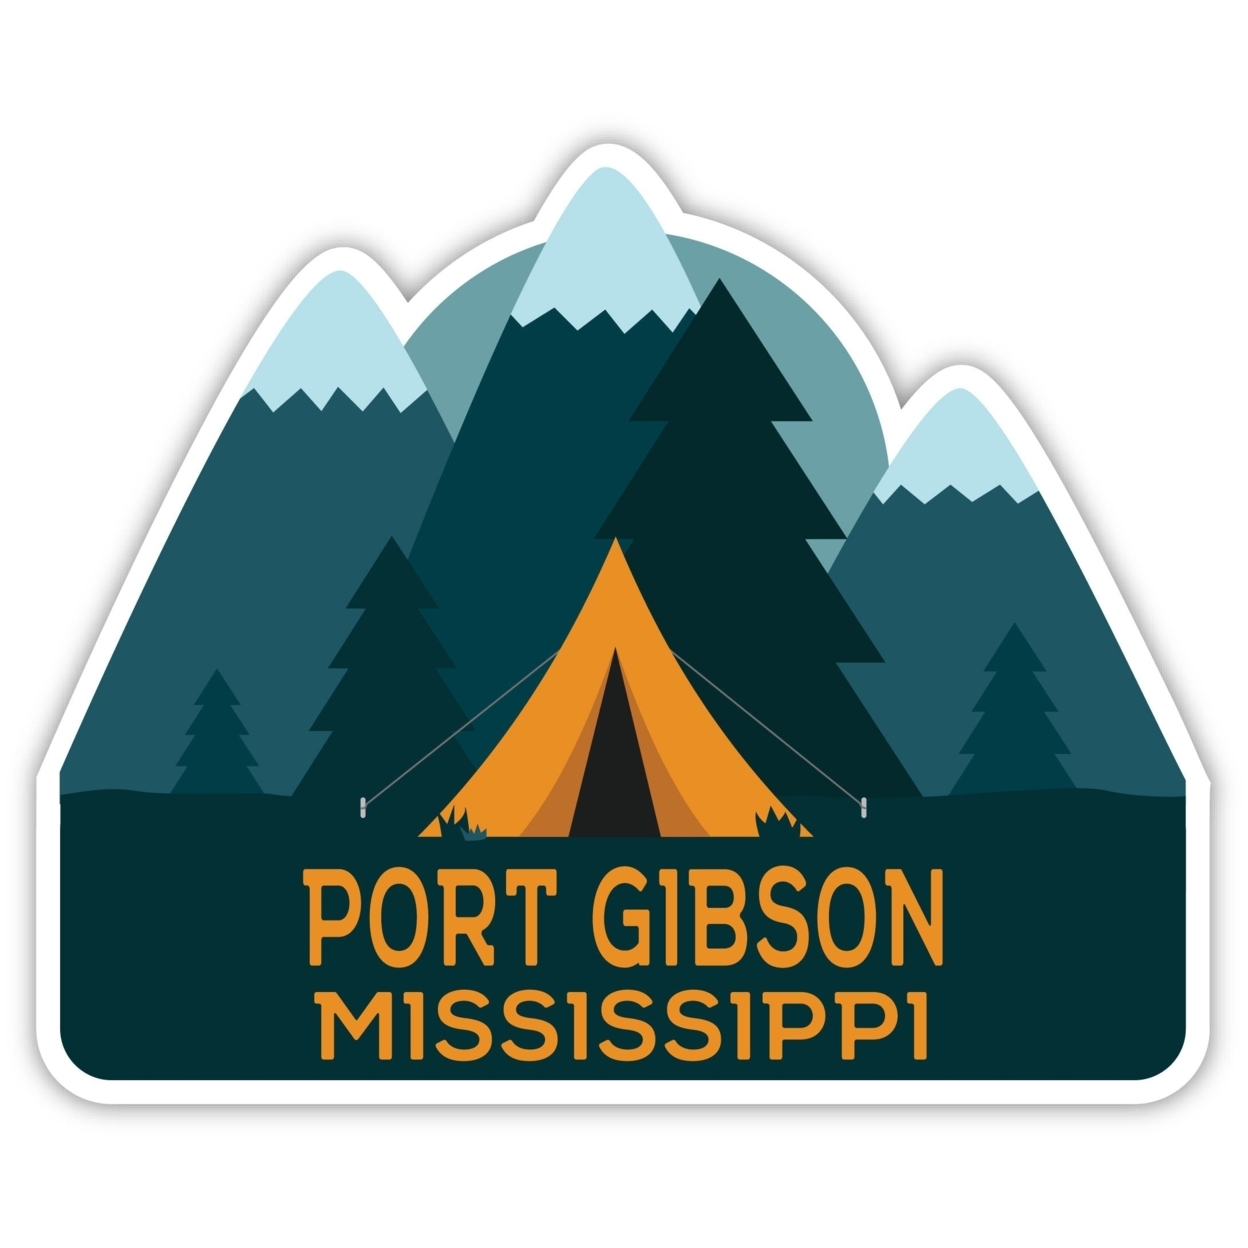 Port Gibson Mississippi Souvenir Decorative Stickers (Choose Theme And Size) - Single Unit, 2-Inch, Tent